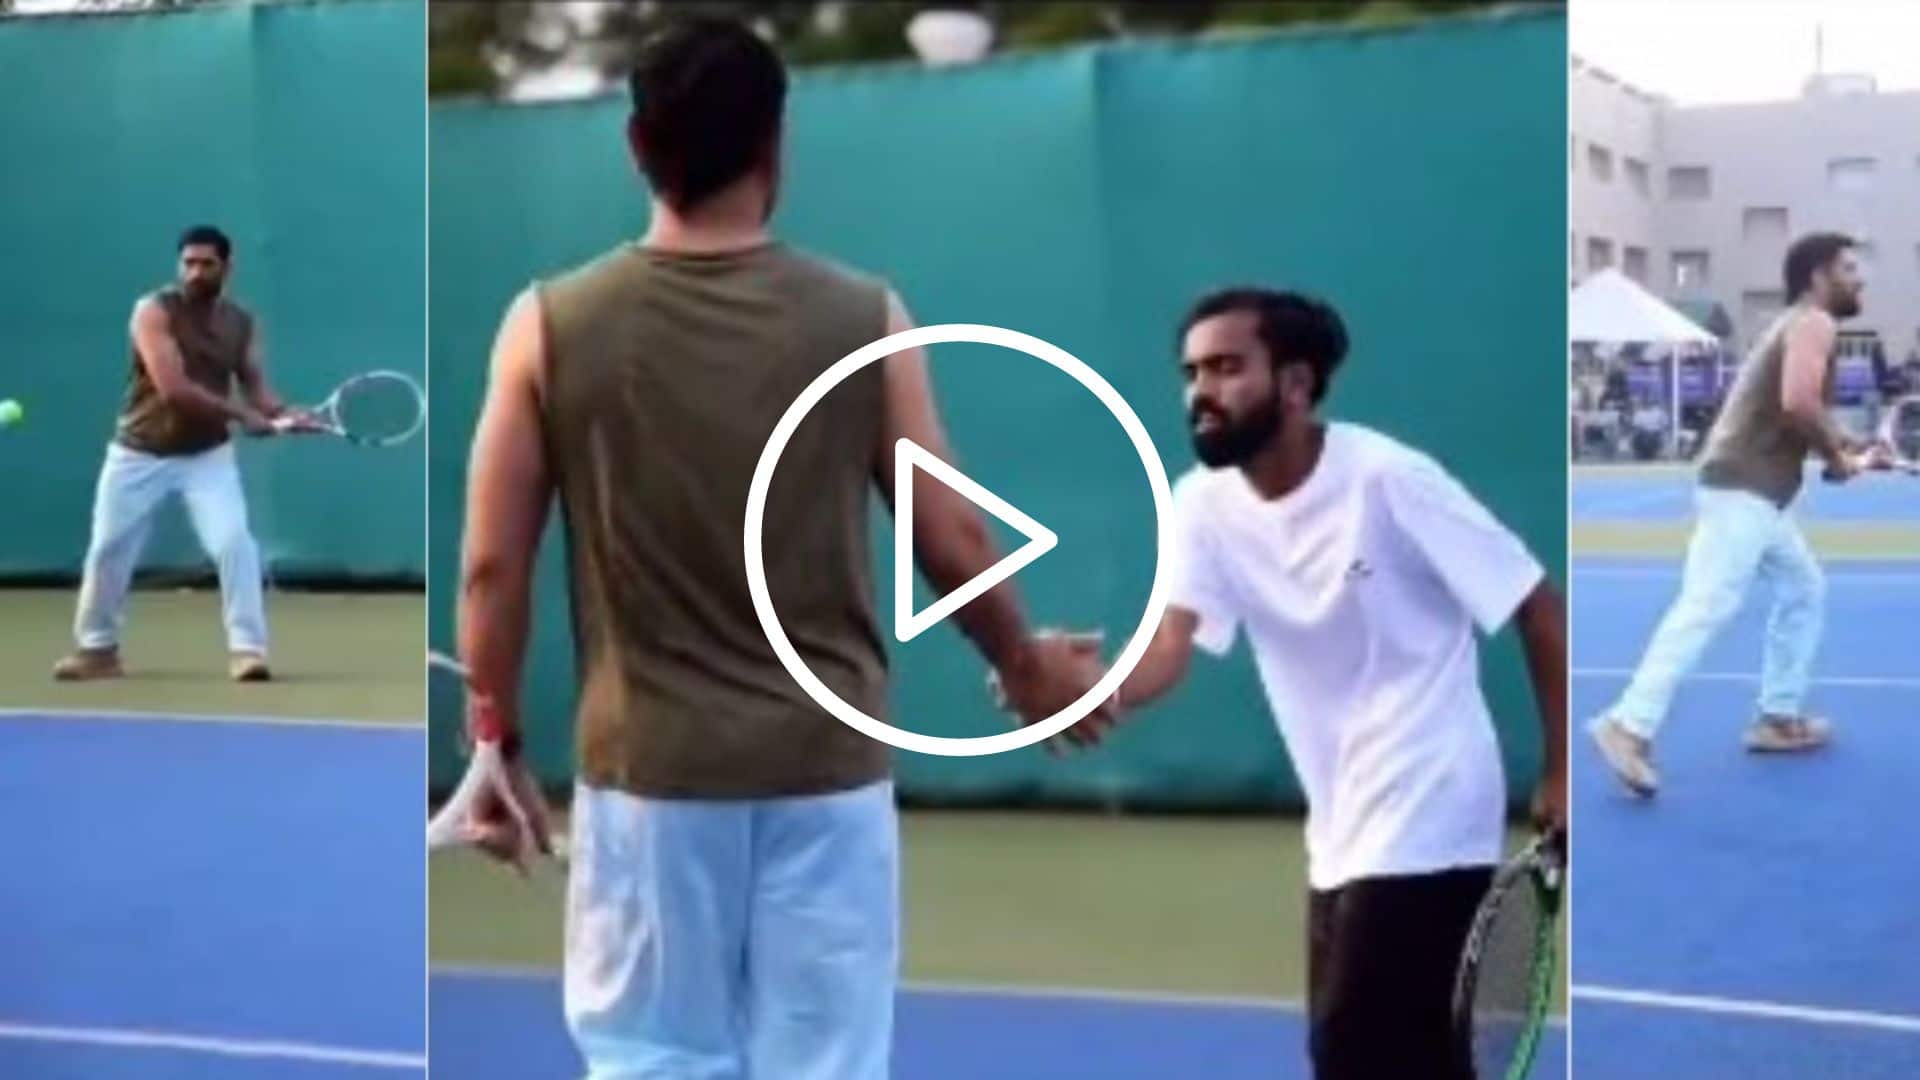 [Watch] When MS Dhoni Set the Internet Ablaze With His Tennis Skills